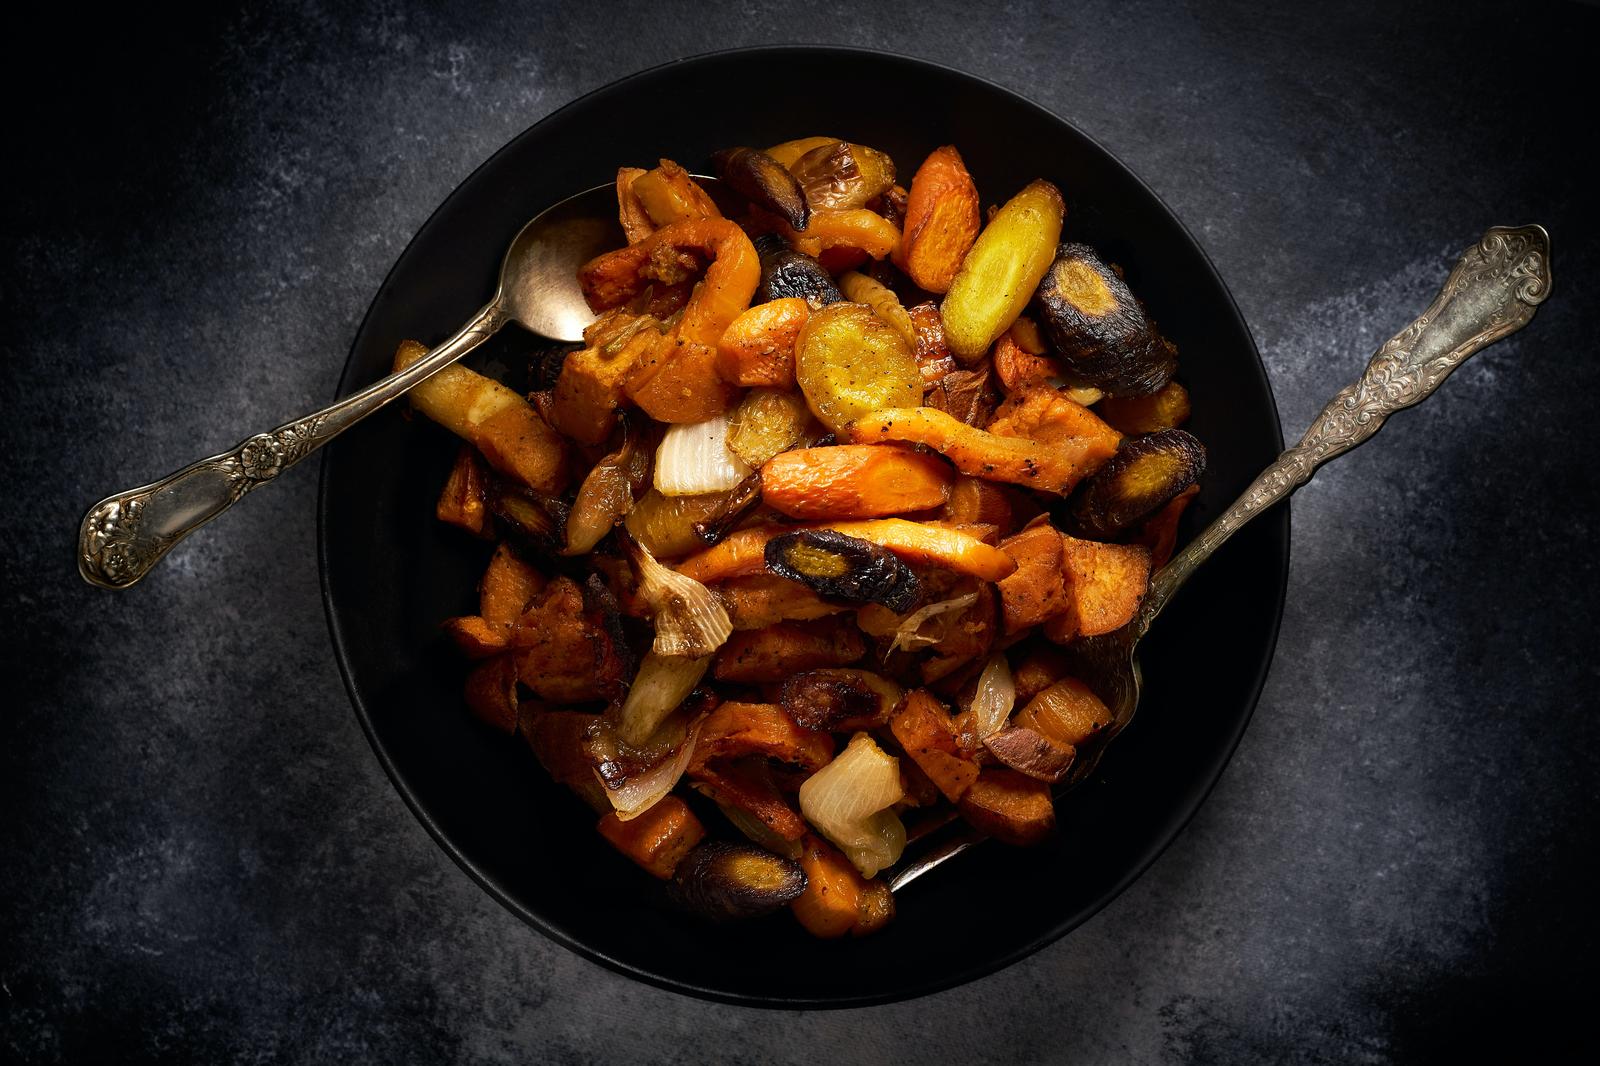 What Winter Comfort Food Are You? Roasted Vegetables